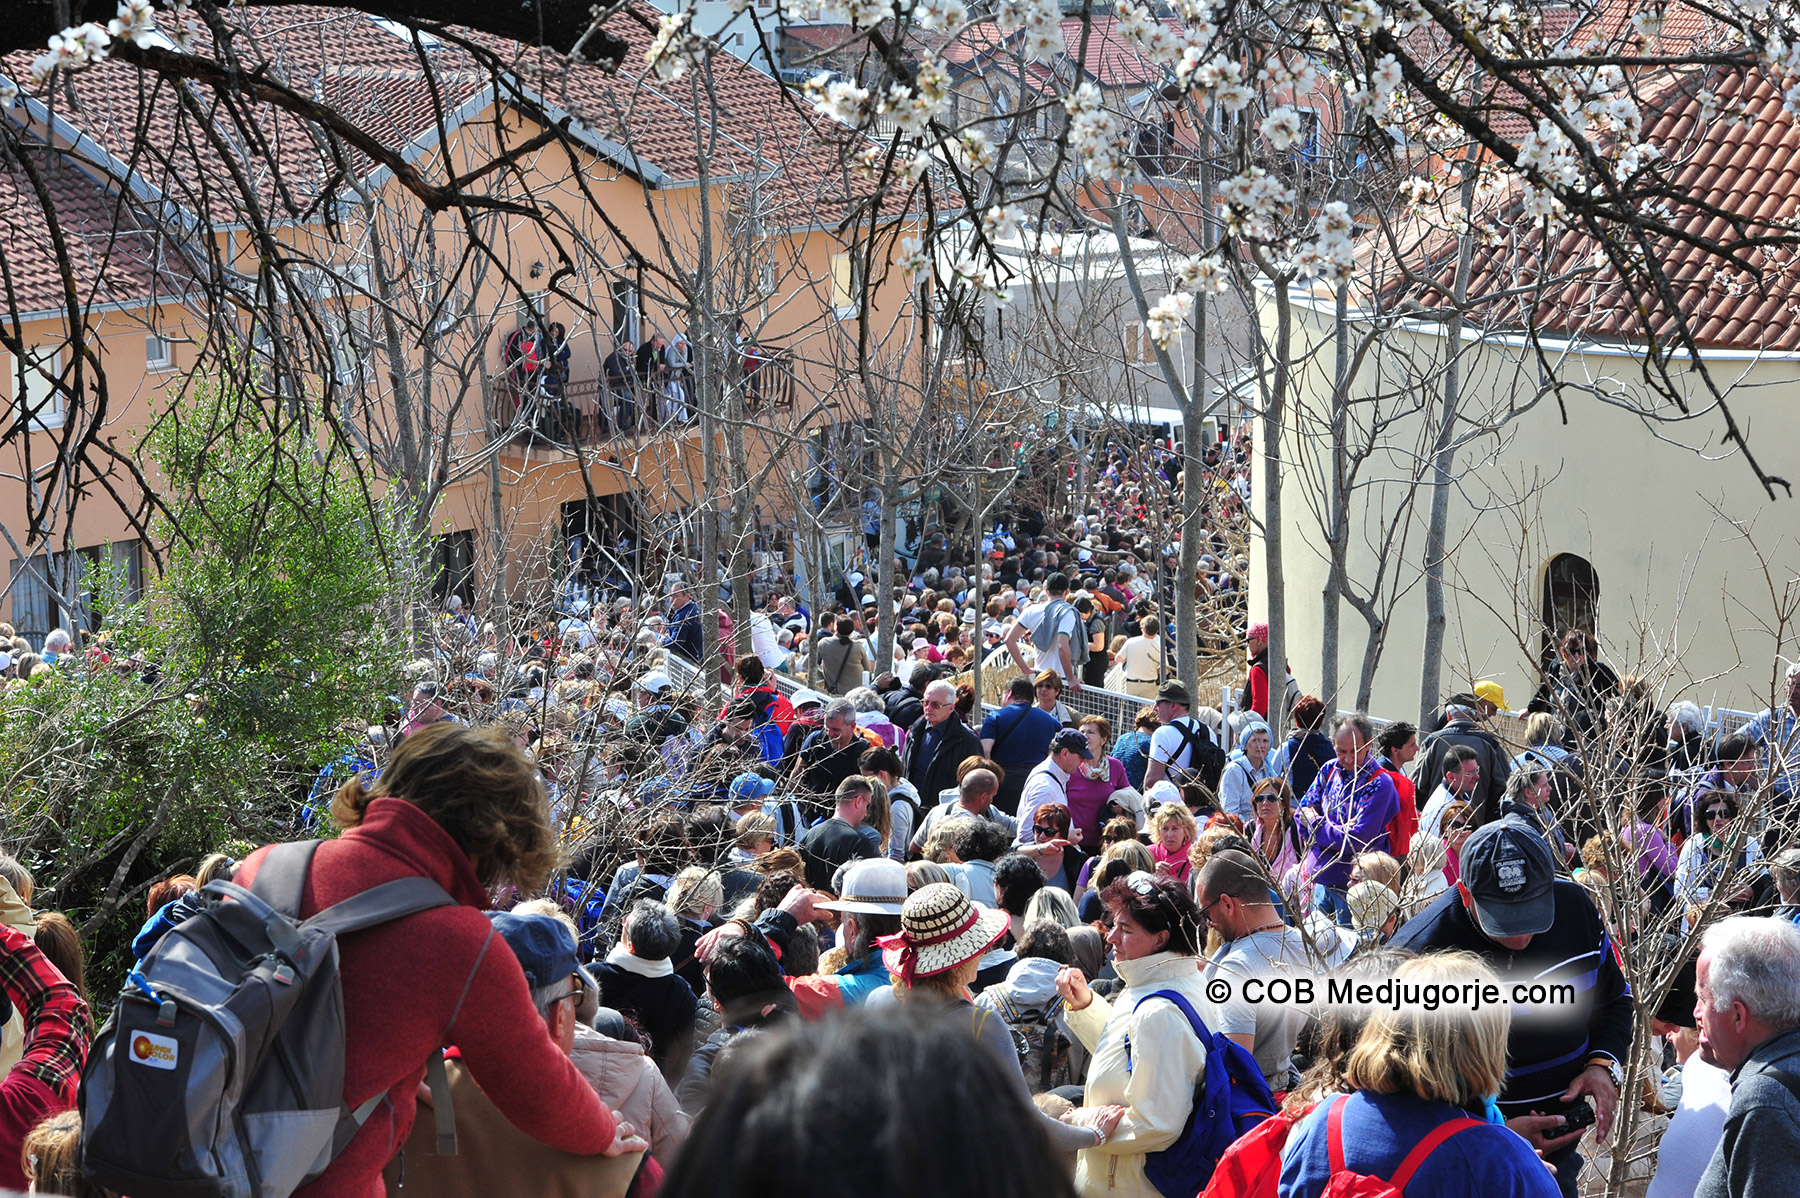 Pilgrims leaving the apparition, March 18, 2012